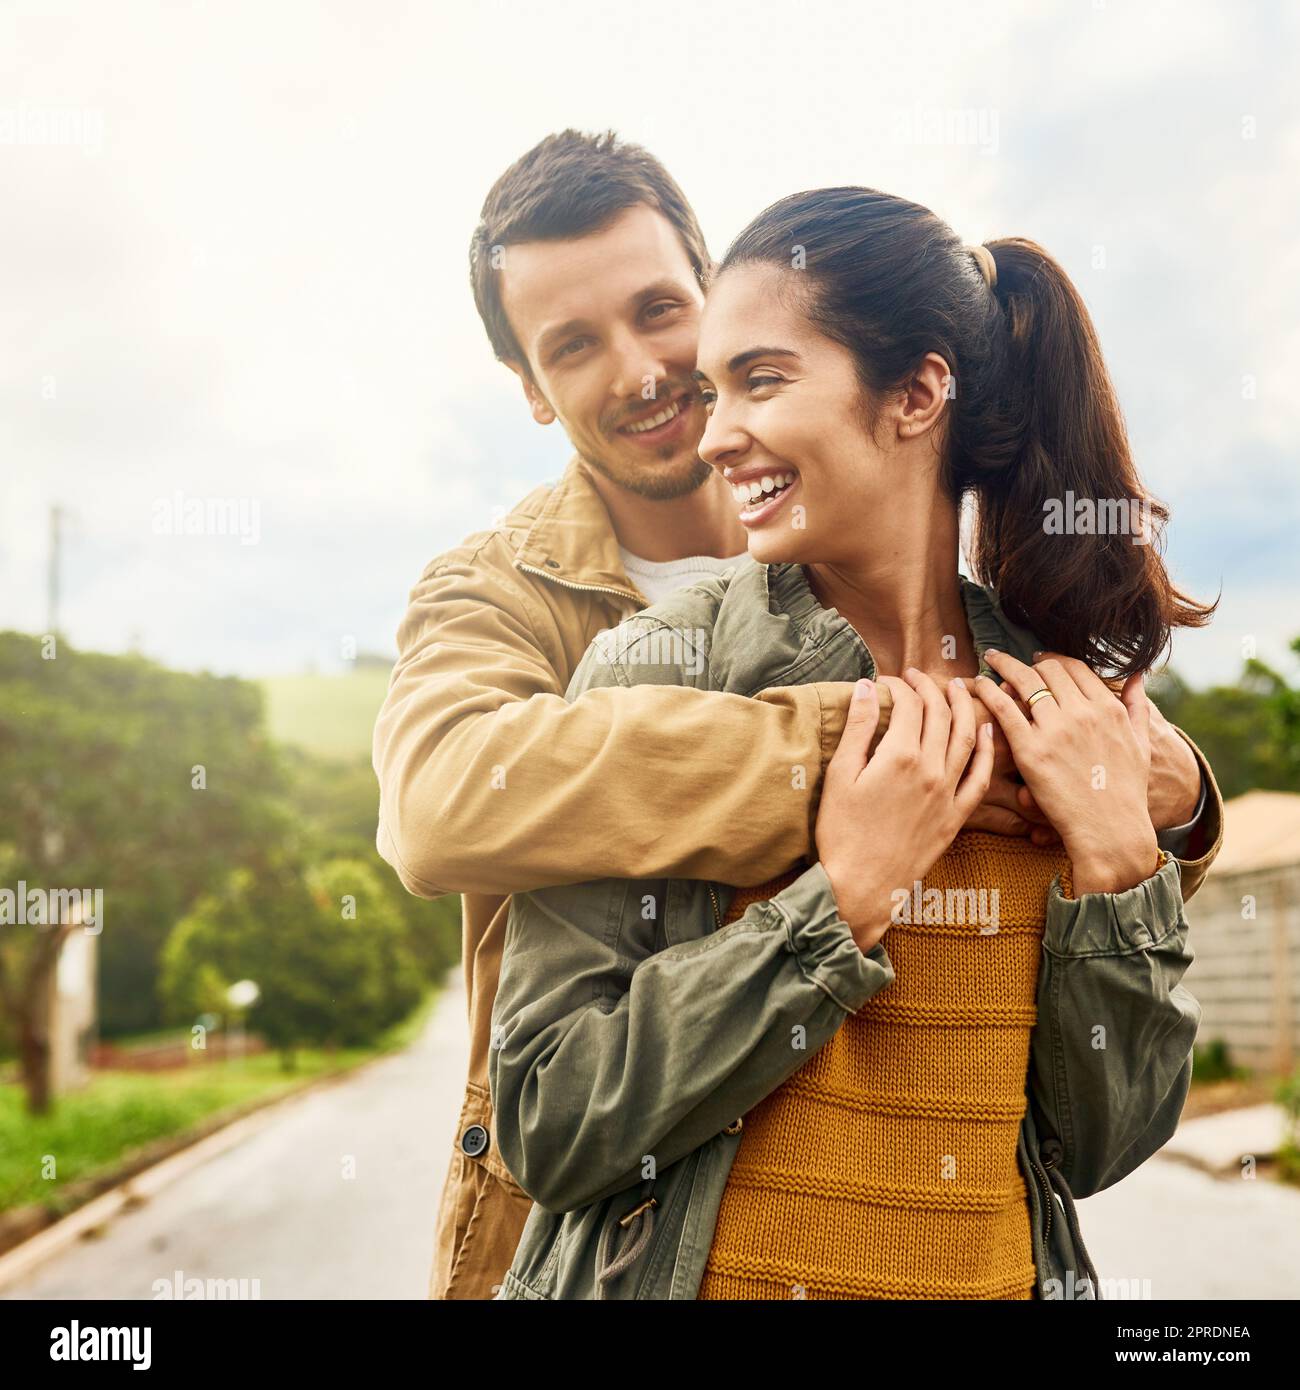 This kinda love will never get old. an affectionate young couple standing outdoors. Stock Photo